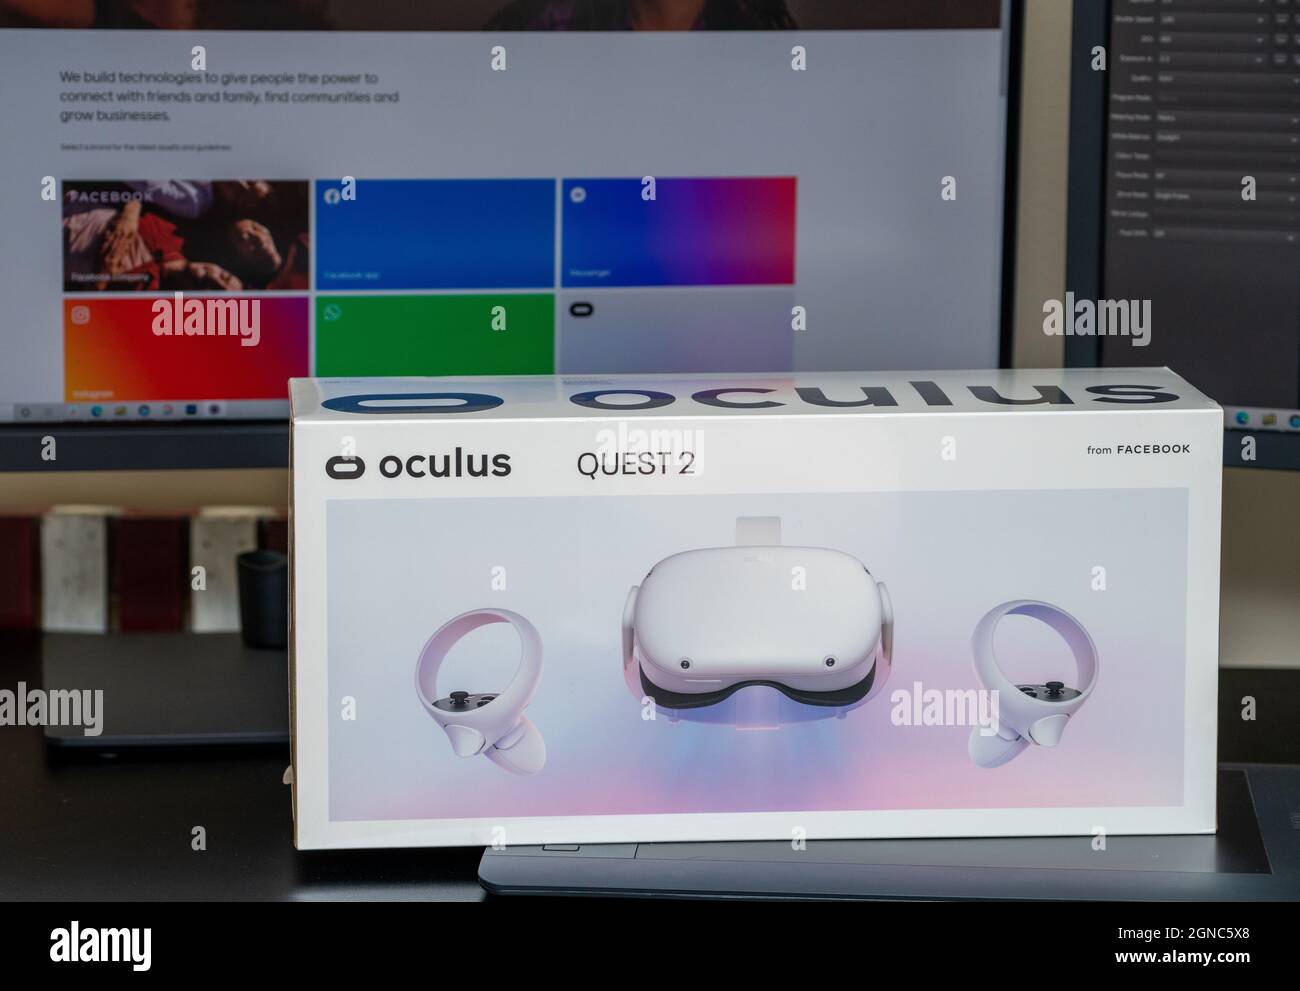 Morgantown, WV - 23 September 2021: Oculus Quest 2 VR headset in box ready  from Metaverse from Facebook Stock Photo - Alamy